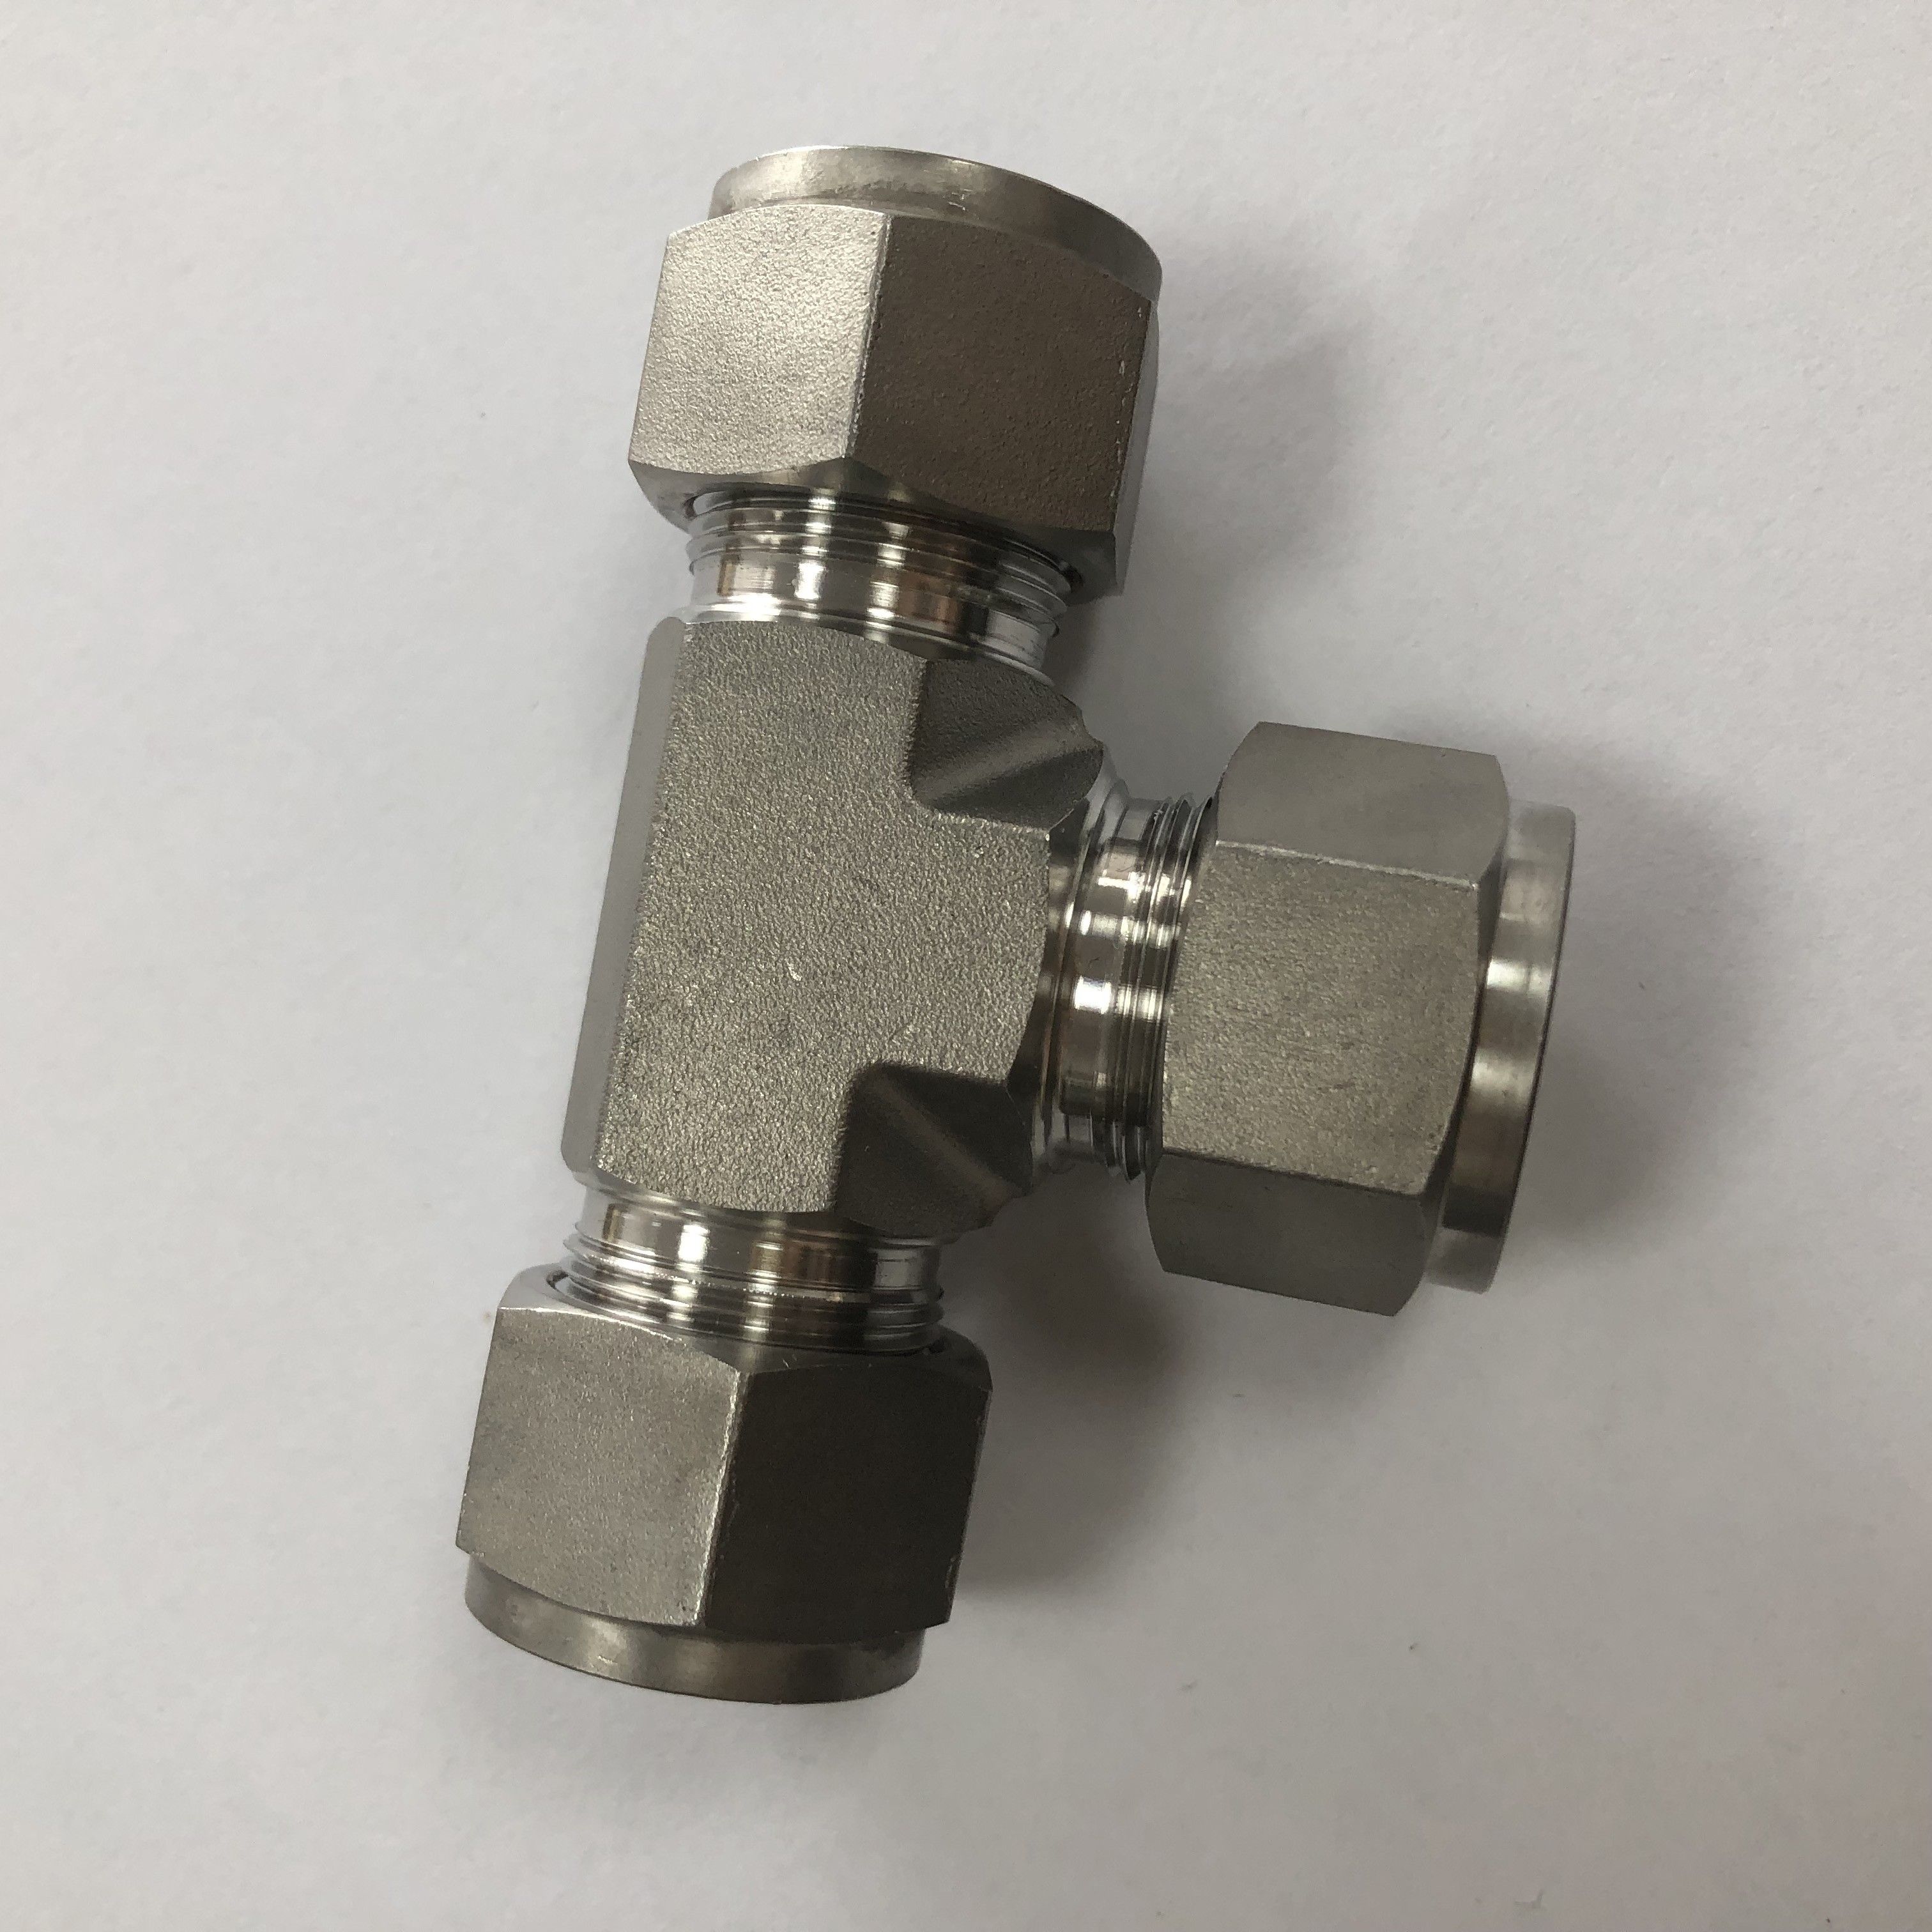 Superlok Parker Standard Stainless Steel Union Tees Fitting For Connecting Pipe